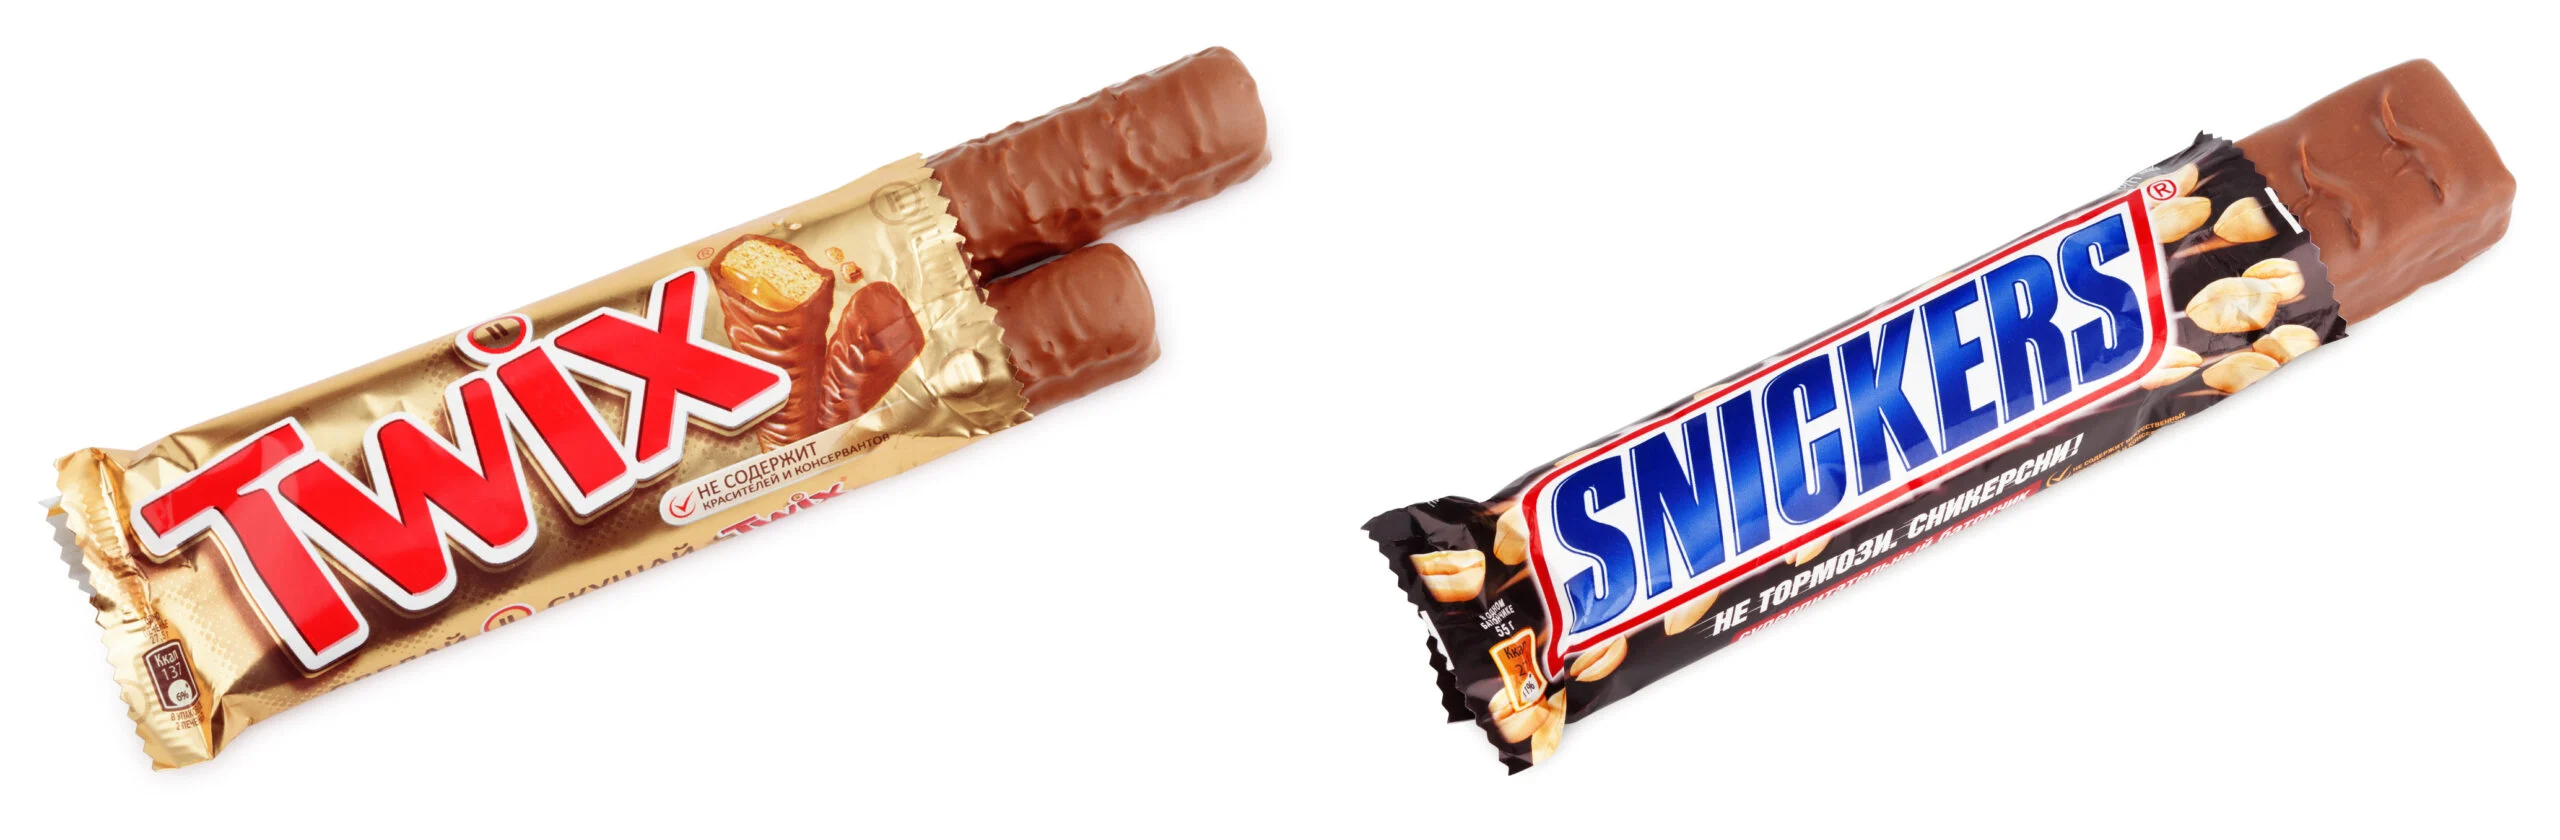 Snickers and Twix: Timeless Brands with an Up-to-date Edge